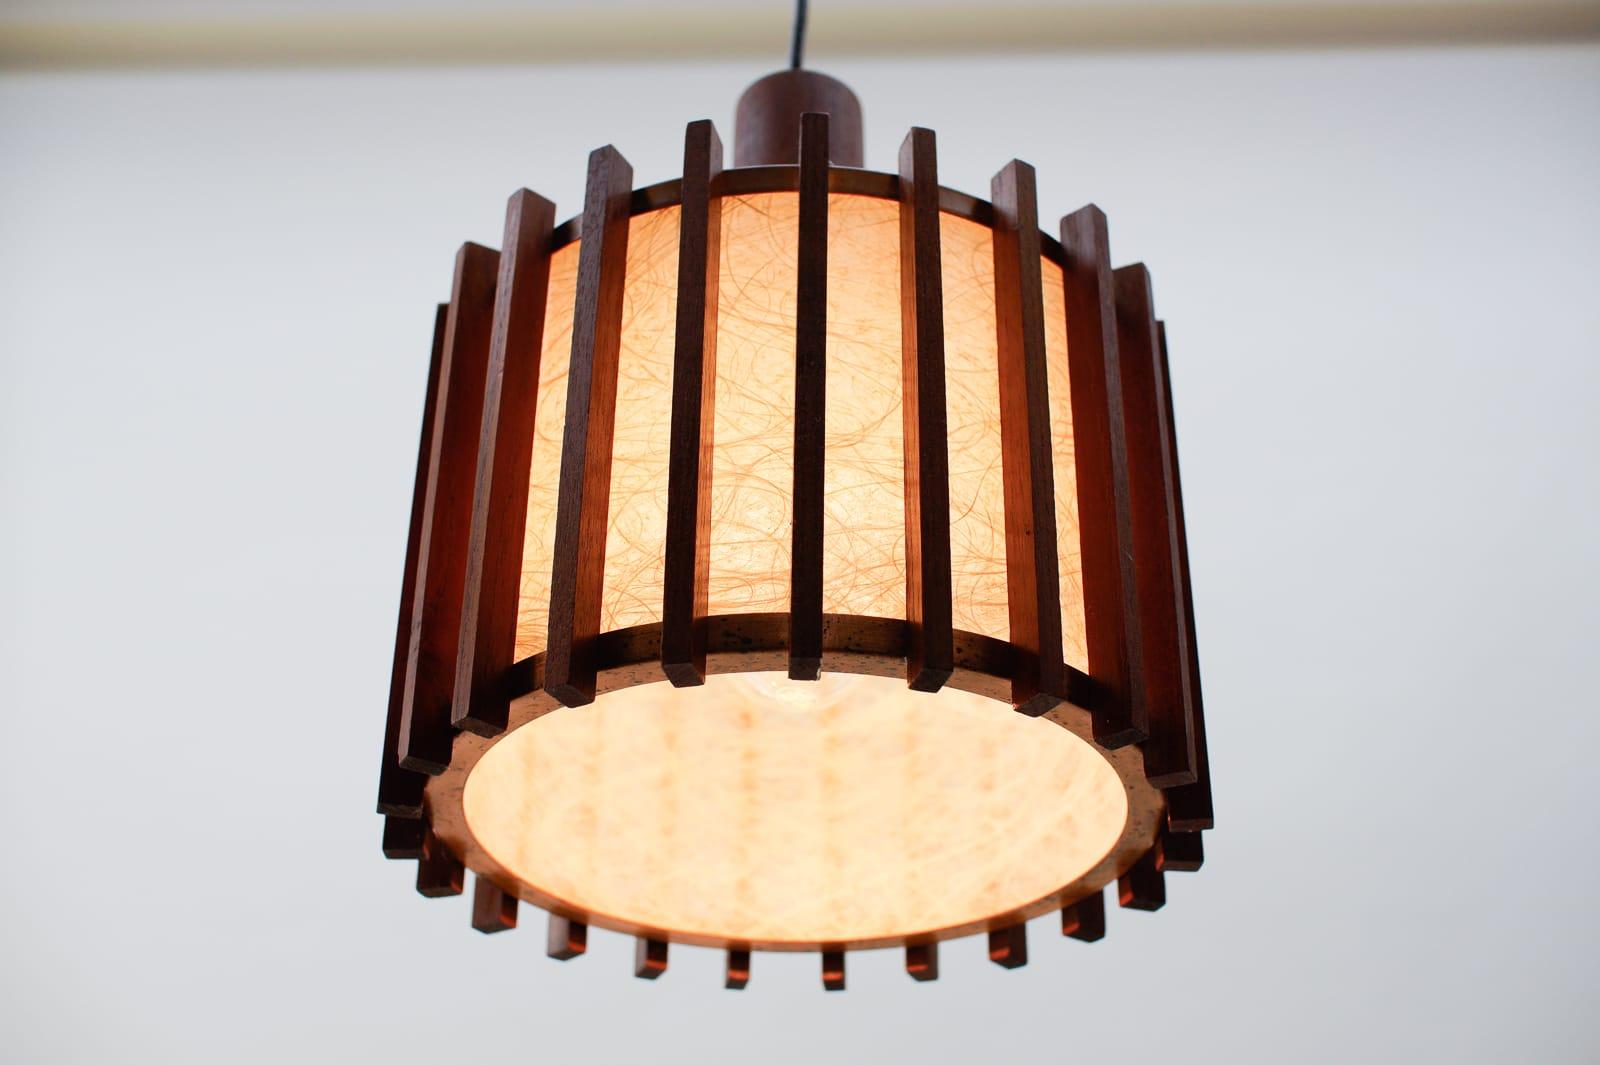 Mid-20th Century Pair of Scandinavian Mid-Century Modern Ceiling Lamps in Teak Wood and Copper For Sale